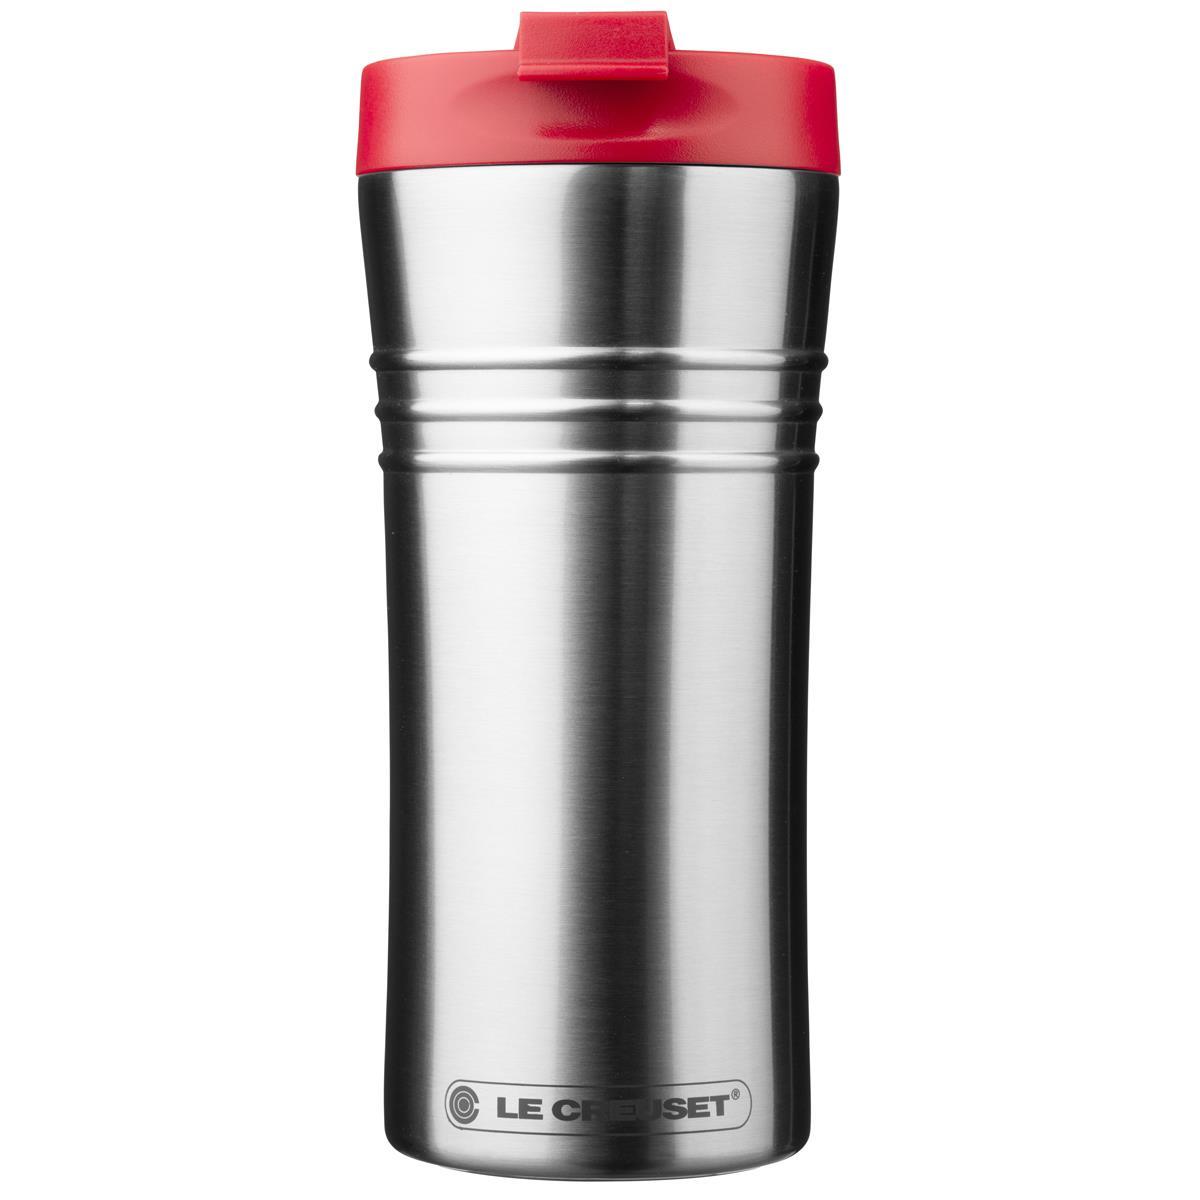 How is the le creuset travel mug made?